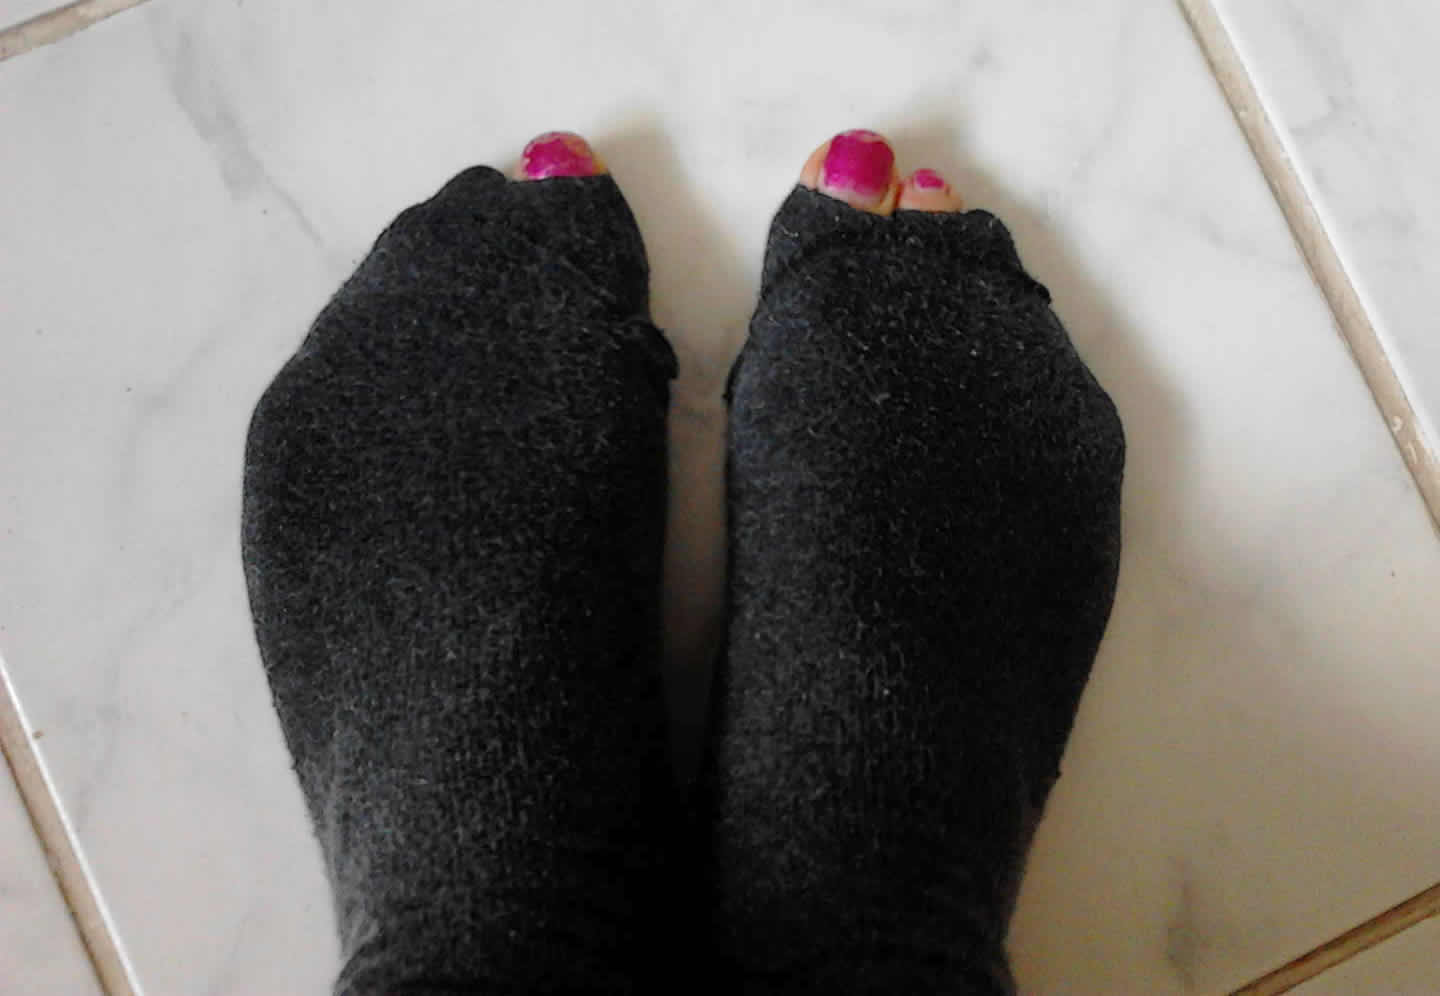 the feet of a person with long, furry socks